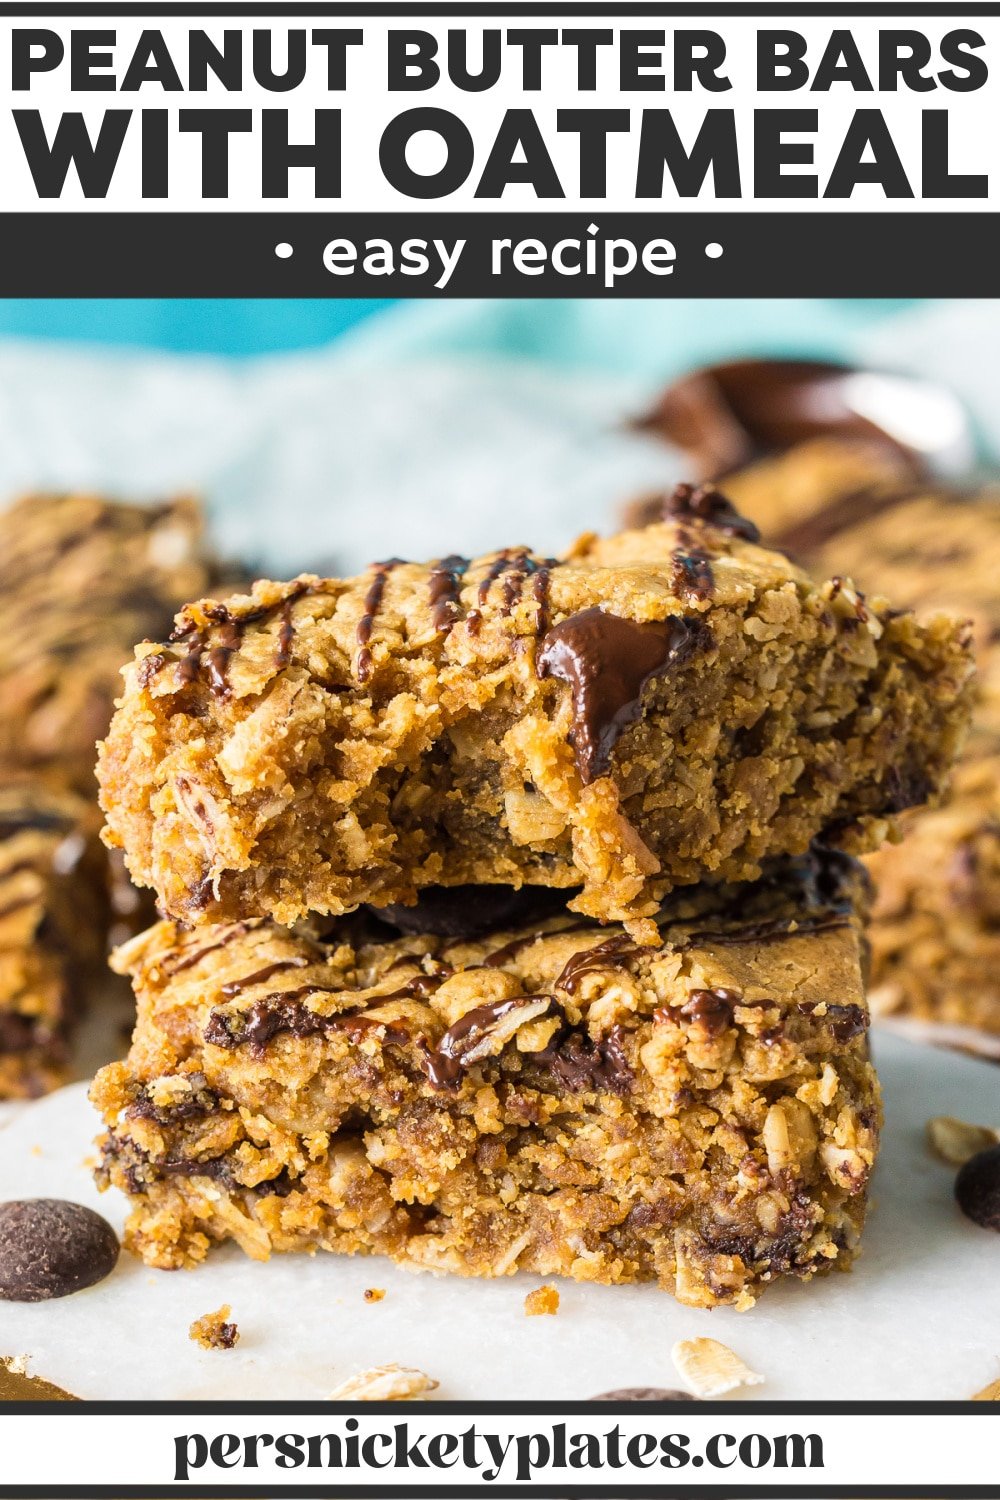 Full of hearty oats and rich peanut butter flavor, these Oatmeal Peanut Butter Bars are the perfect blend of salty and sweet. Finished off with a chocolate drizzle, these soft and chewy bars are the ultimate snack. | www.persnicketyplates.com